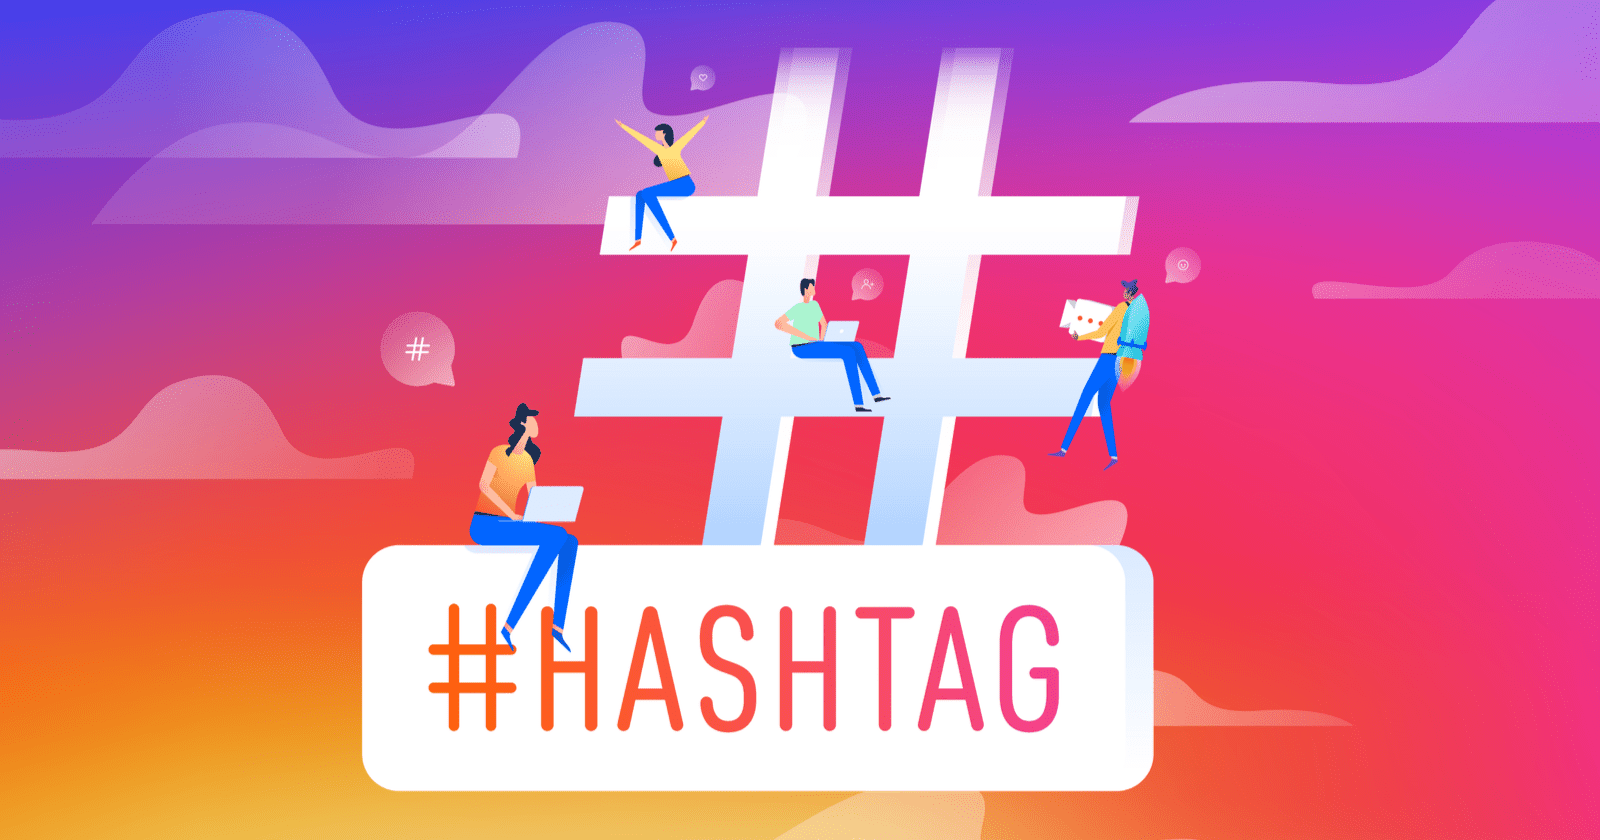 All about hashtags Instagram